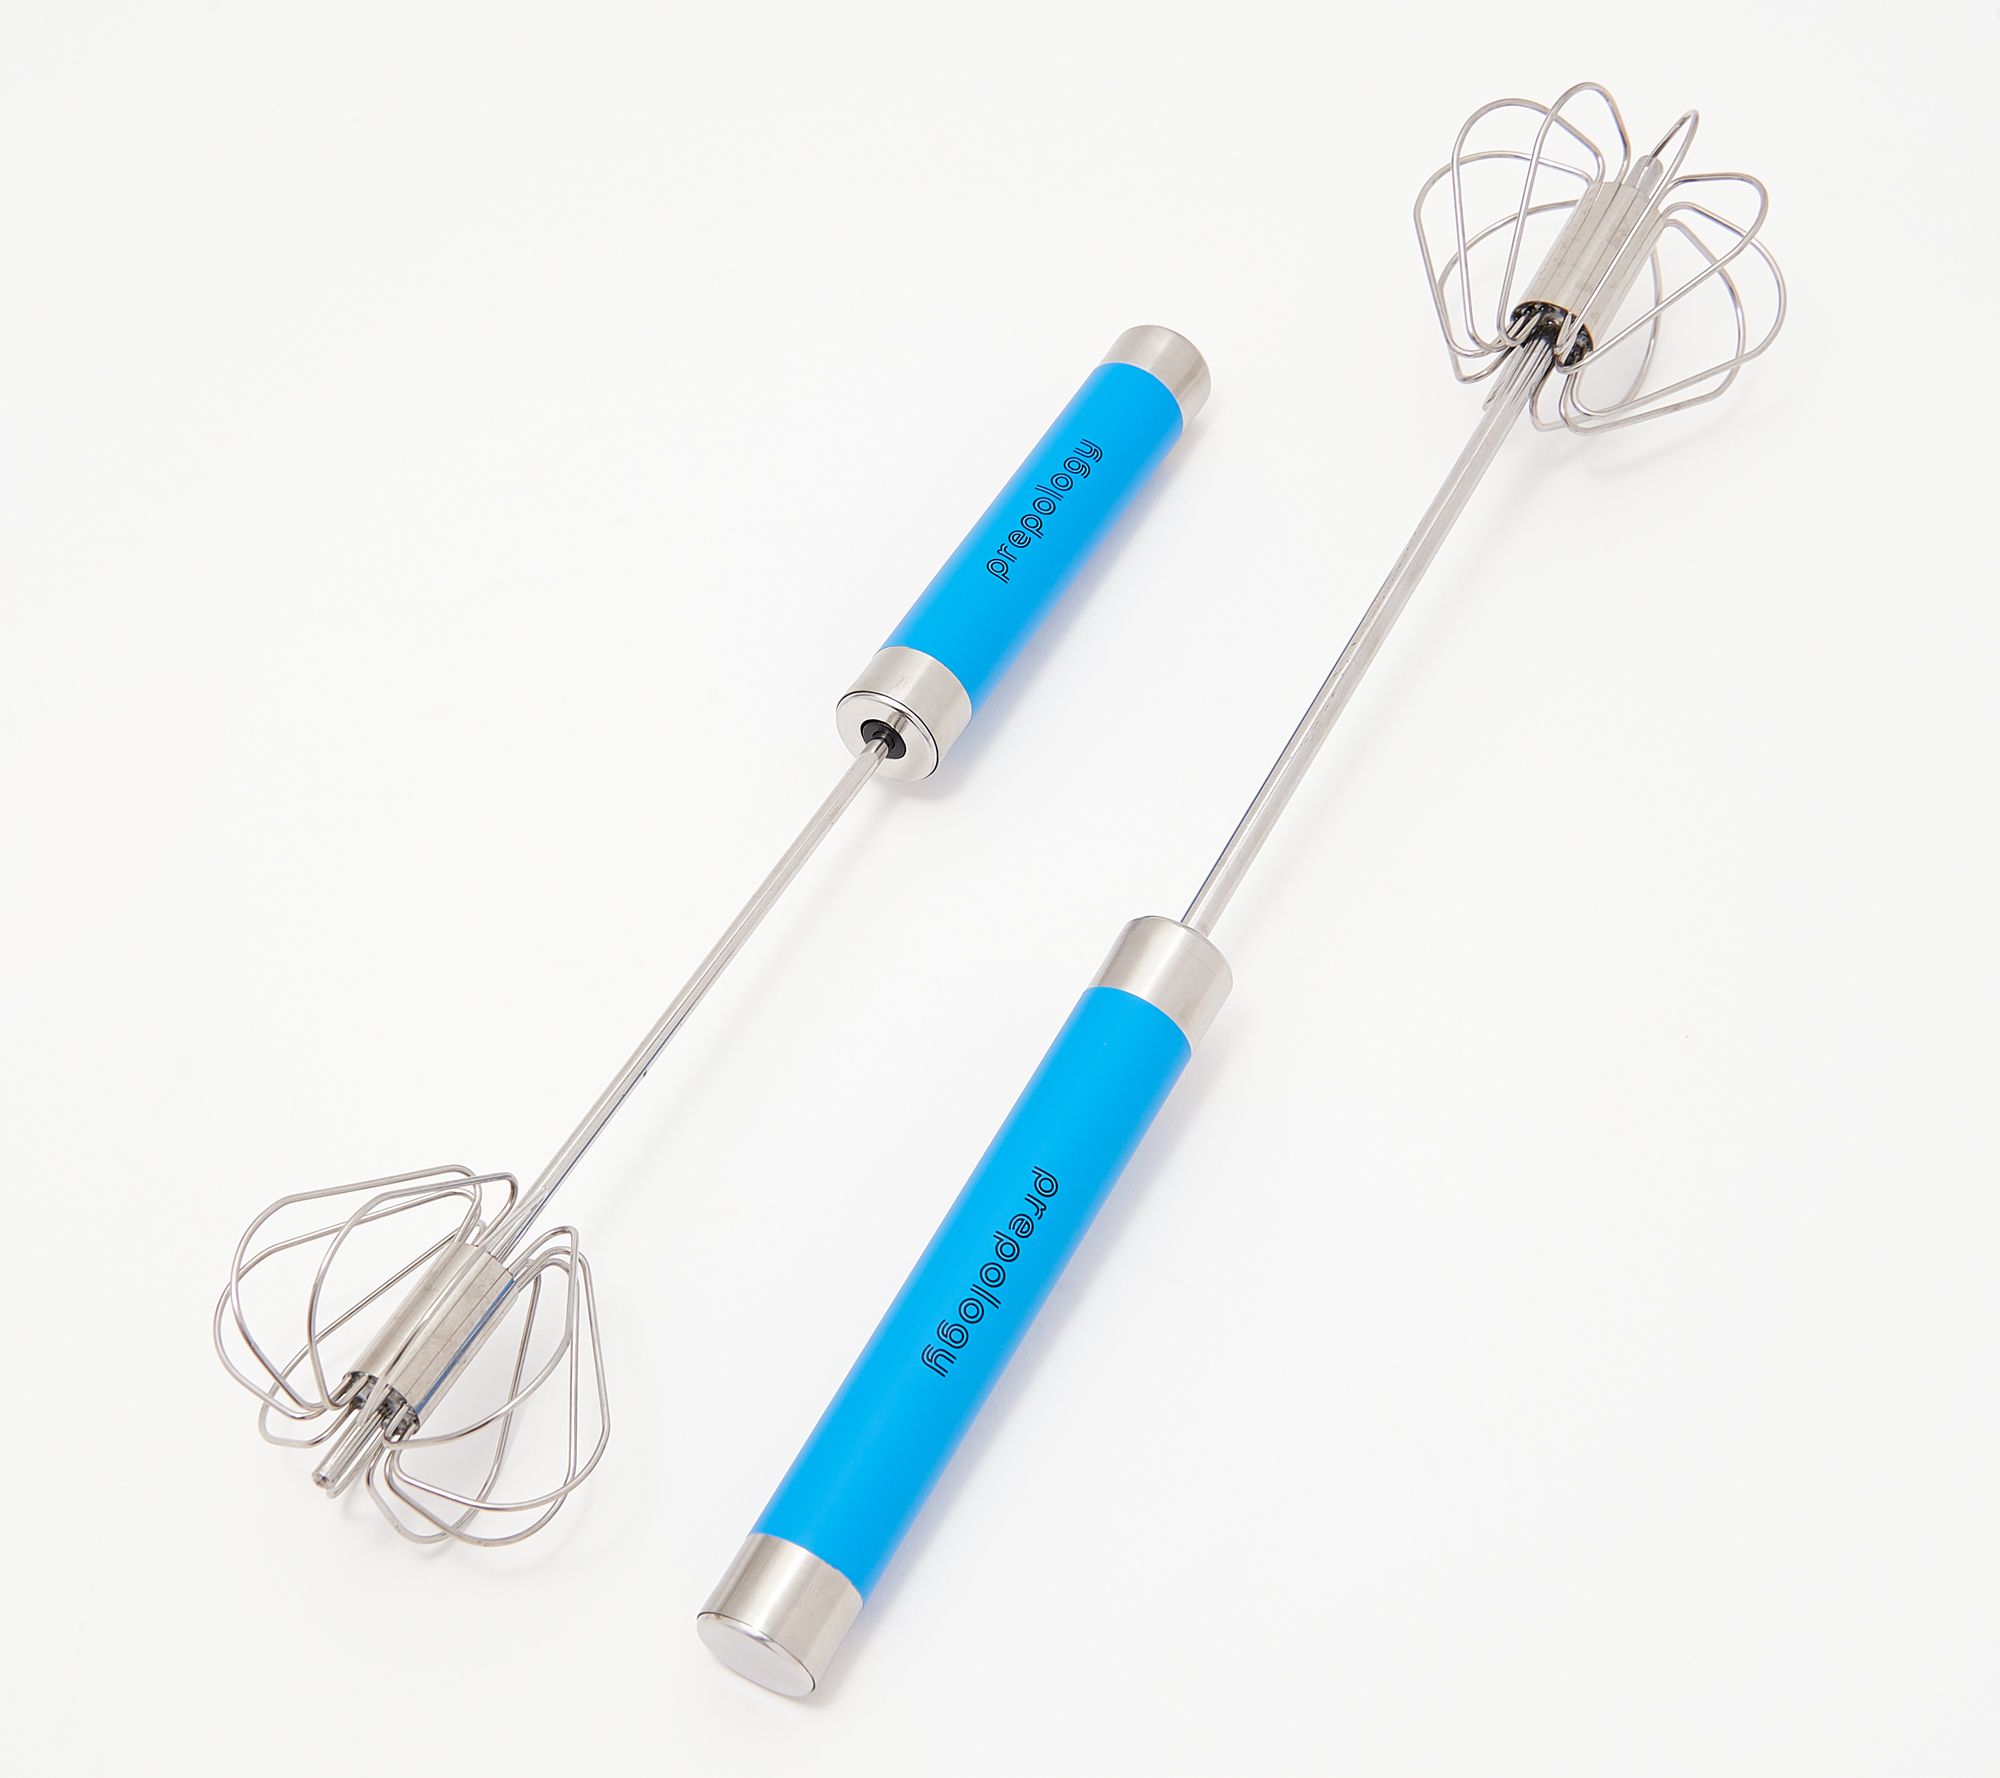 Push Whisk - The Active Hands Company